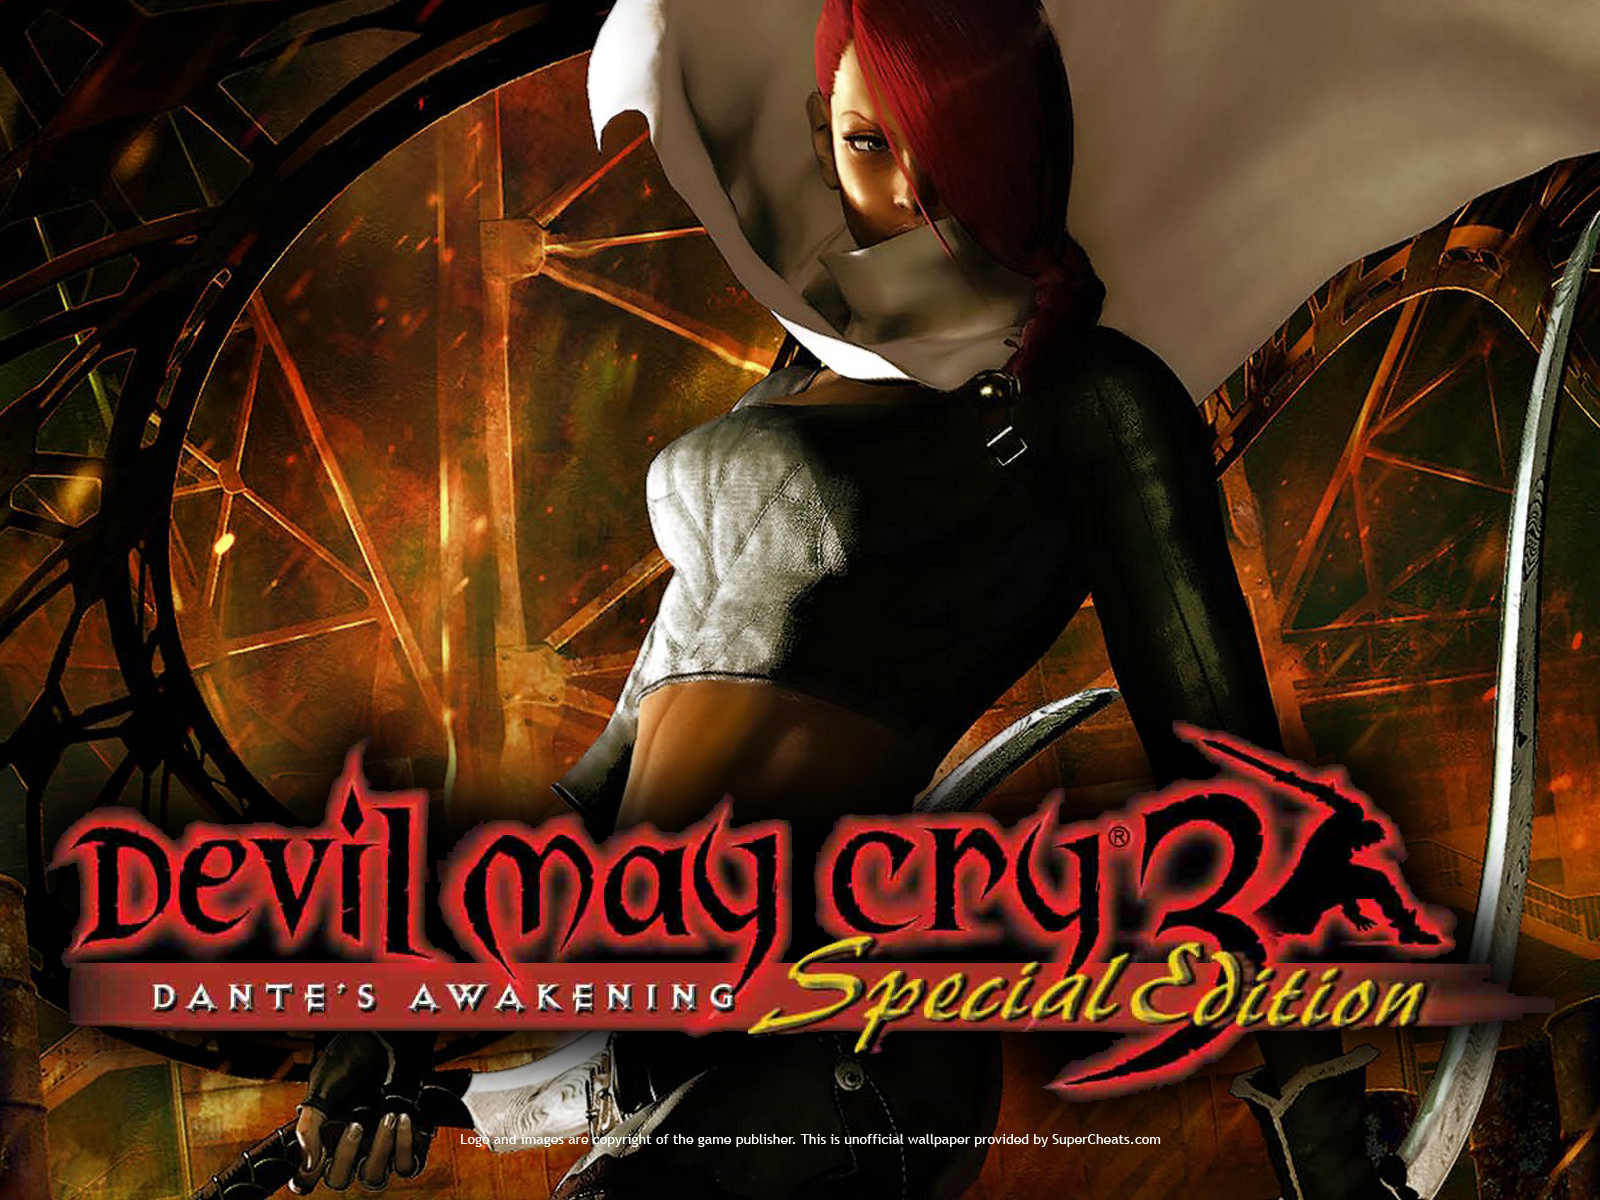 Devil+may+cry+3+special+edition